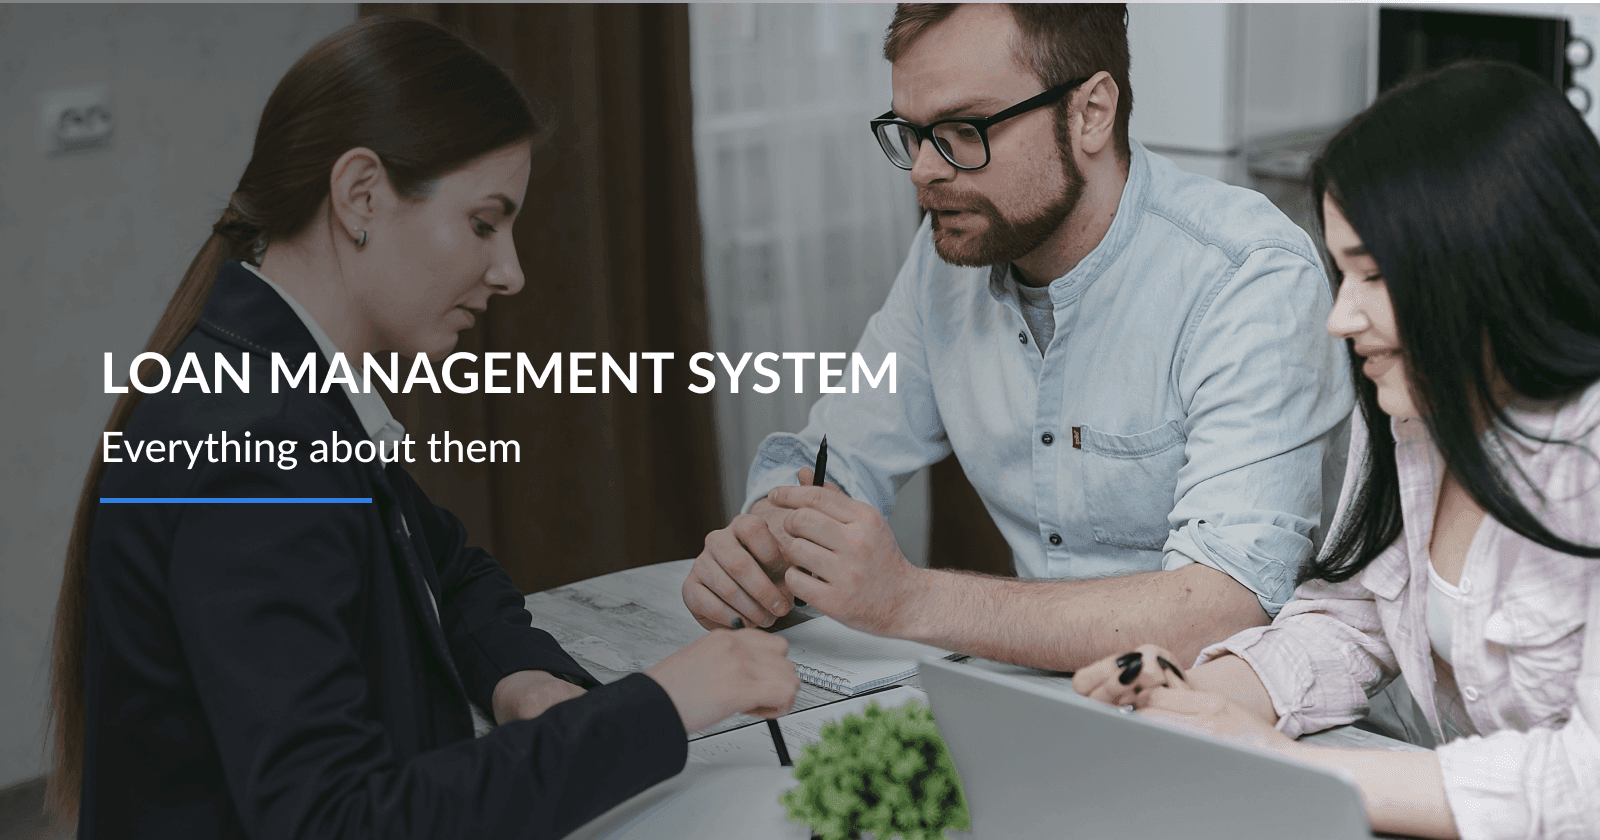 Loan Management System & Everything about them